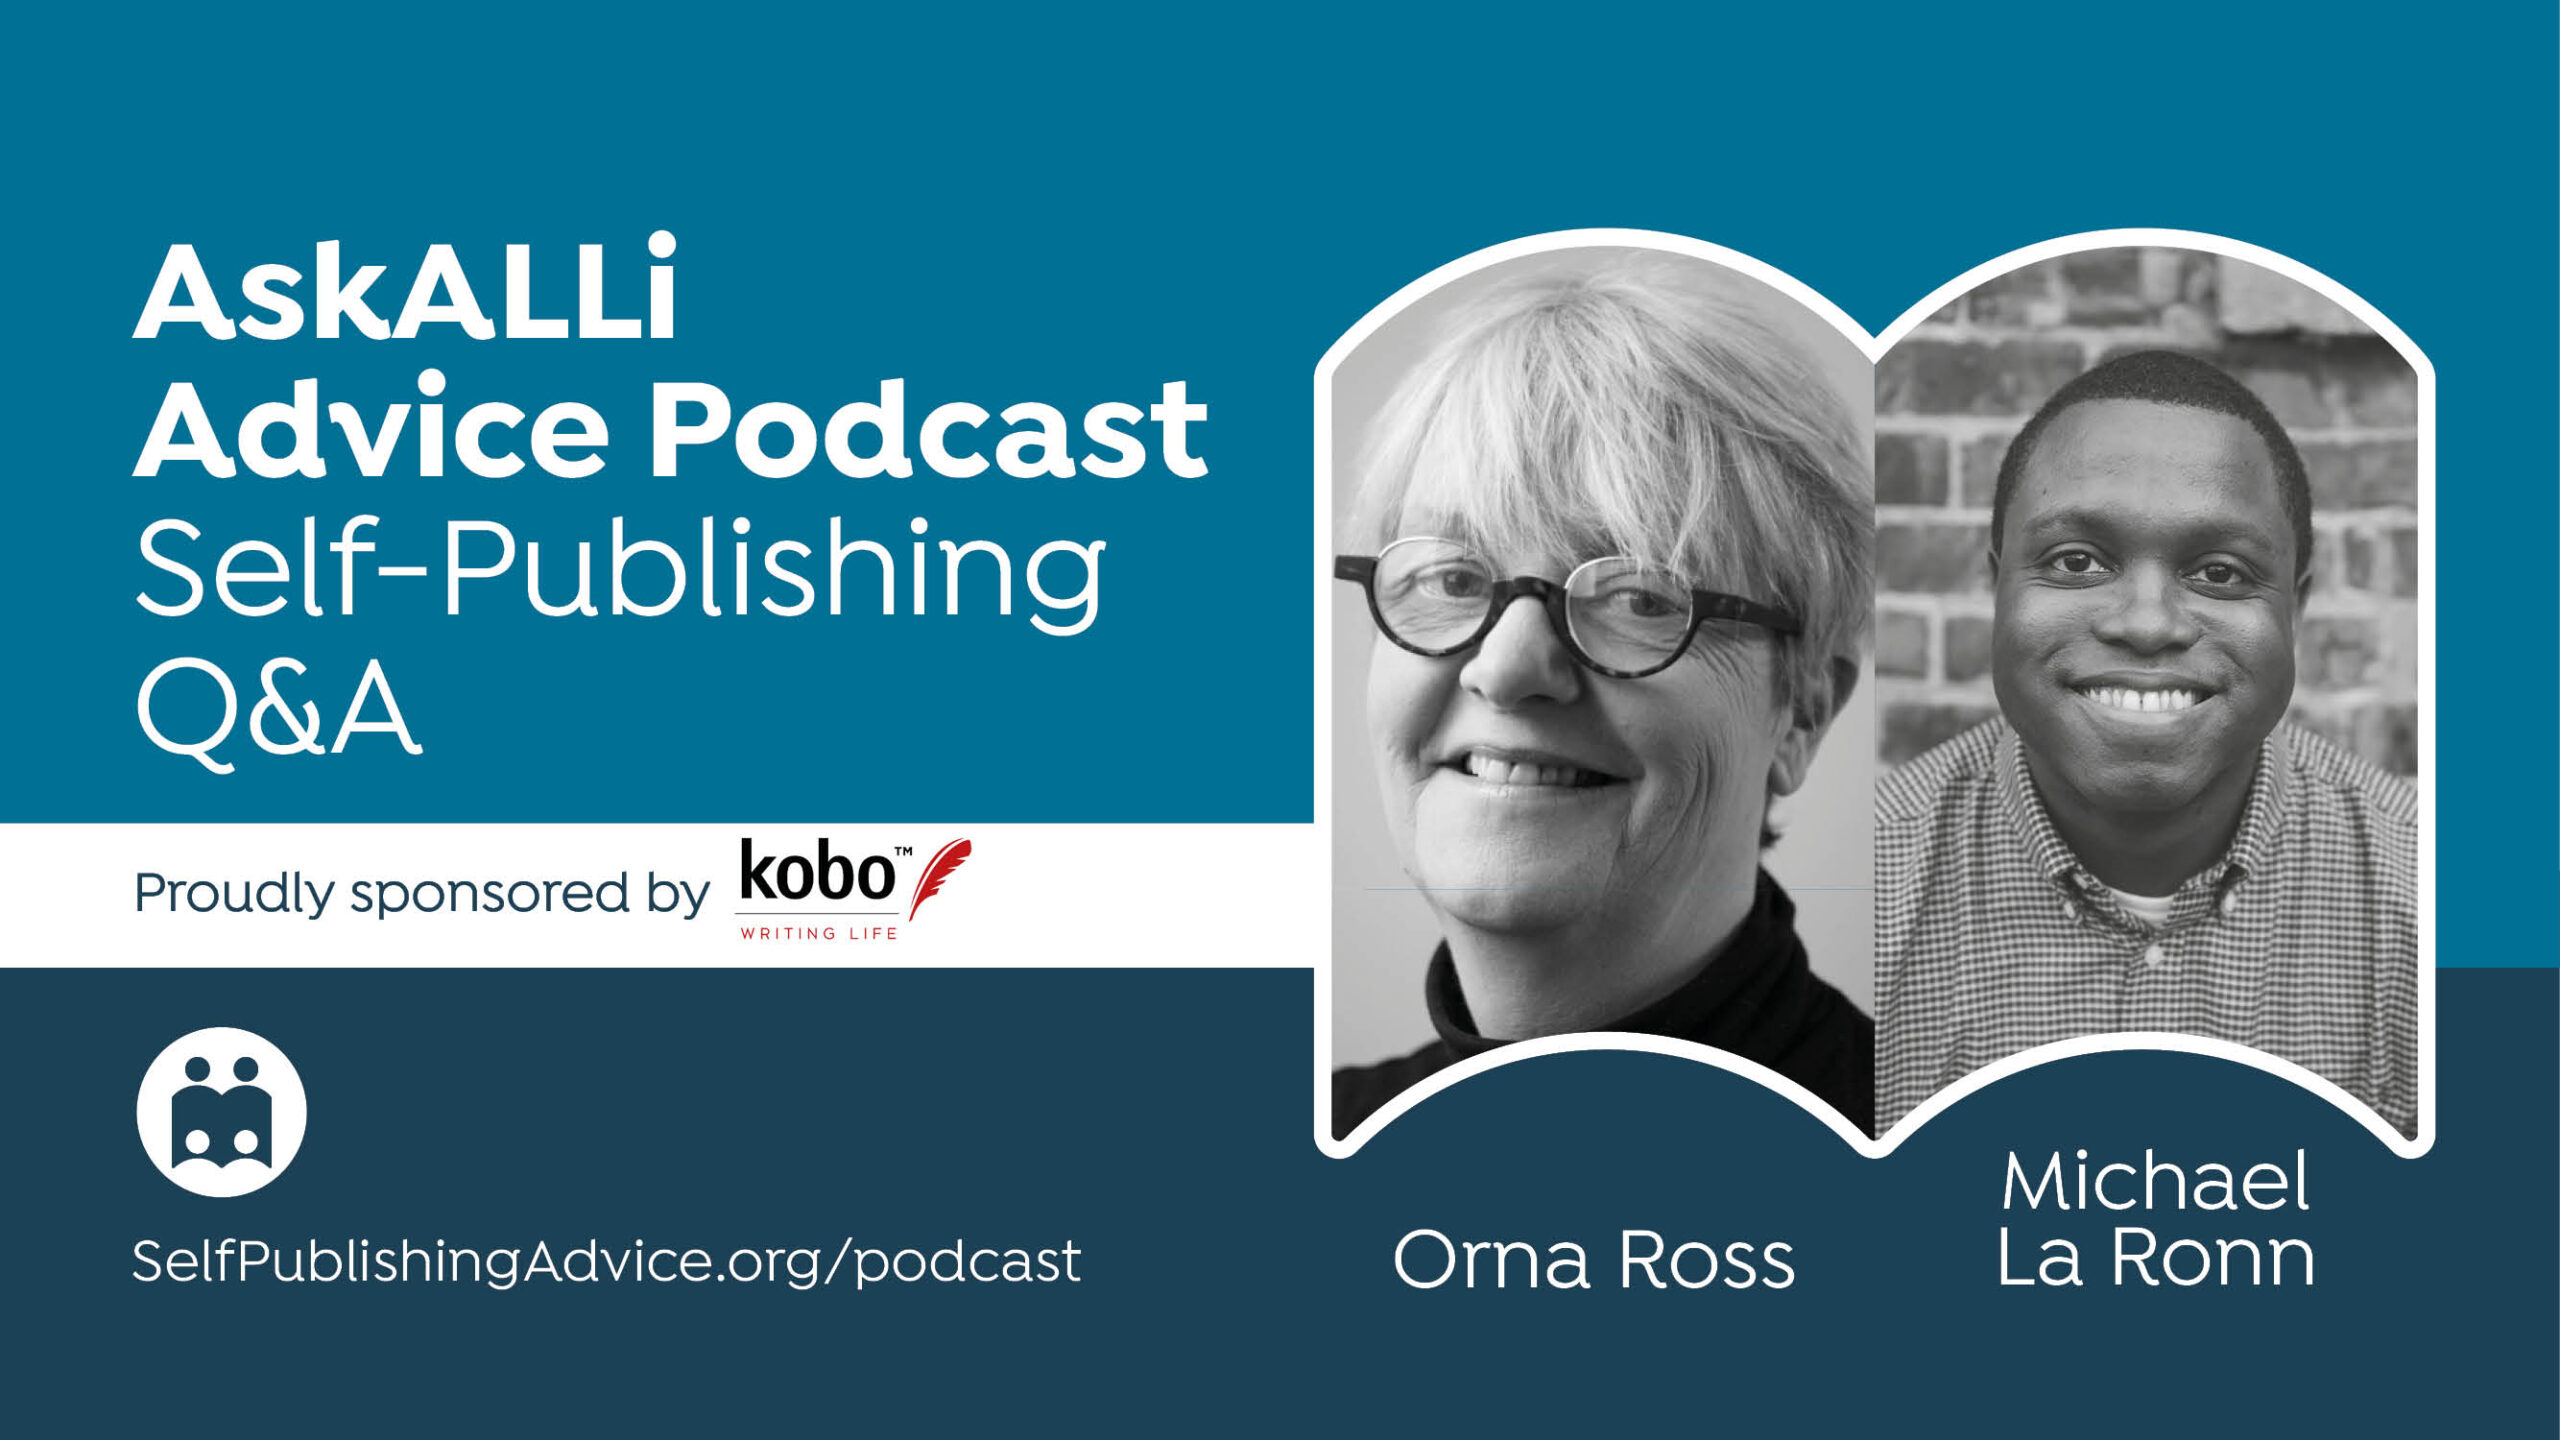 How Do I Obtain Photo Permission In My Book? Other Questions Answered By Orna Ross And Michael La Ronn In Our Member Q&A Podcast